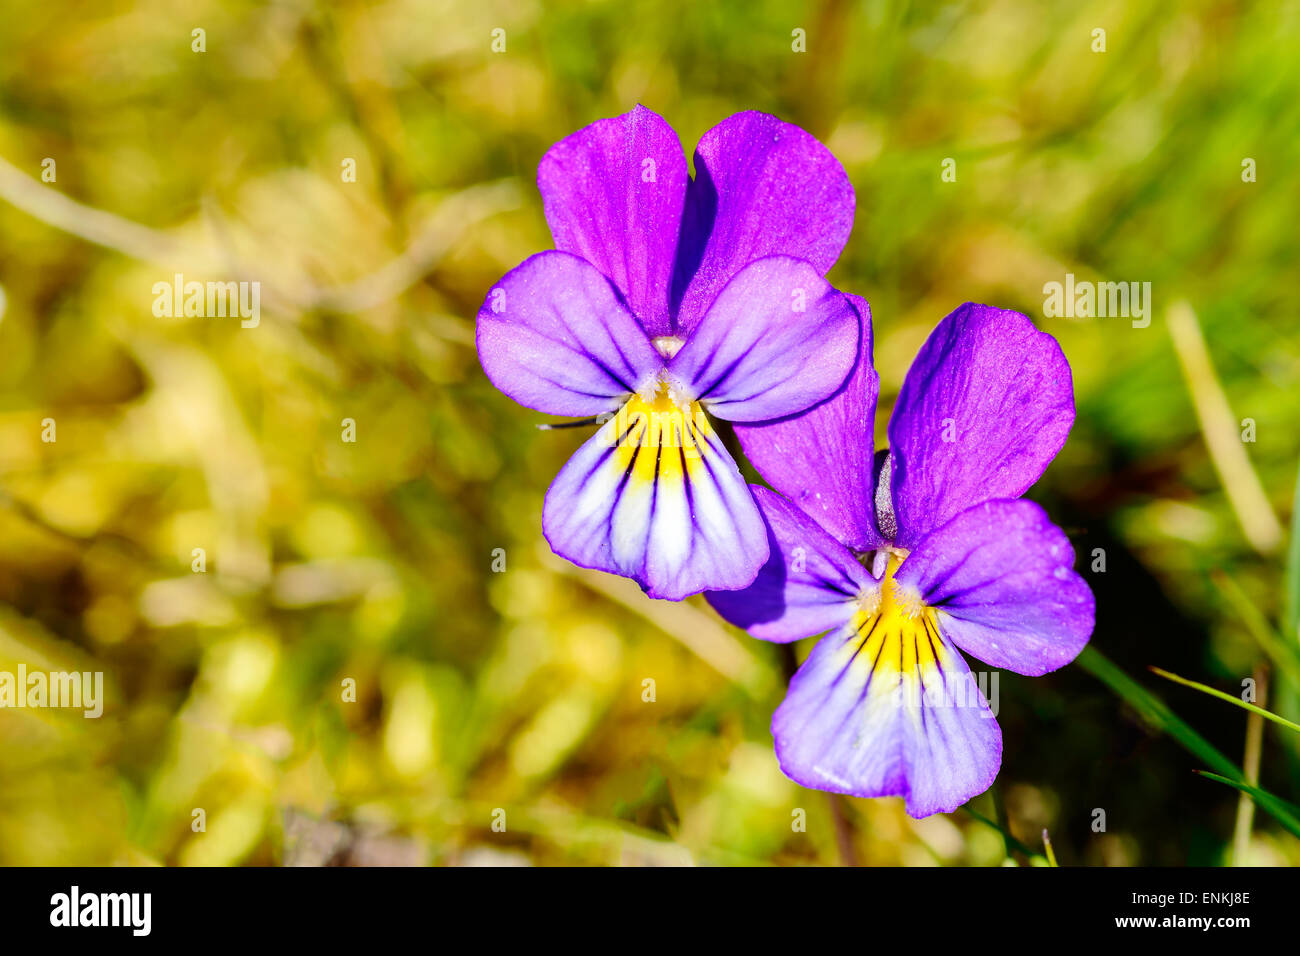 Heartsease (Viola tricolor). Here are two fine flowers against a greenish background. Heartsease is edible and medicinal. Stock Photo